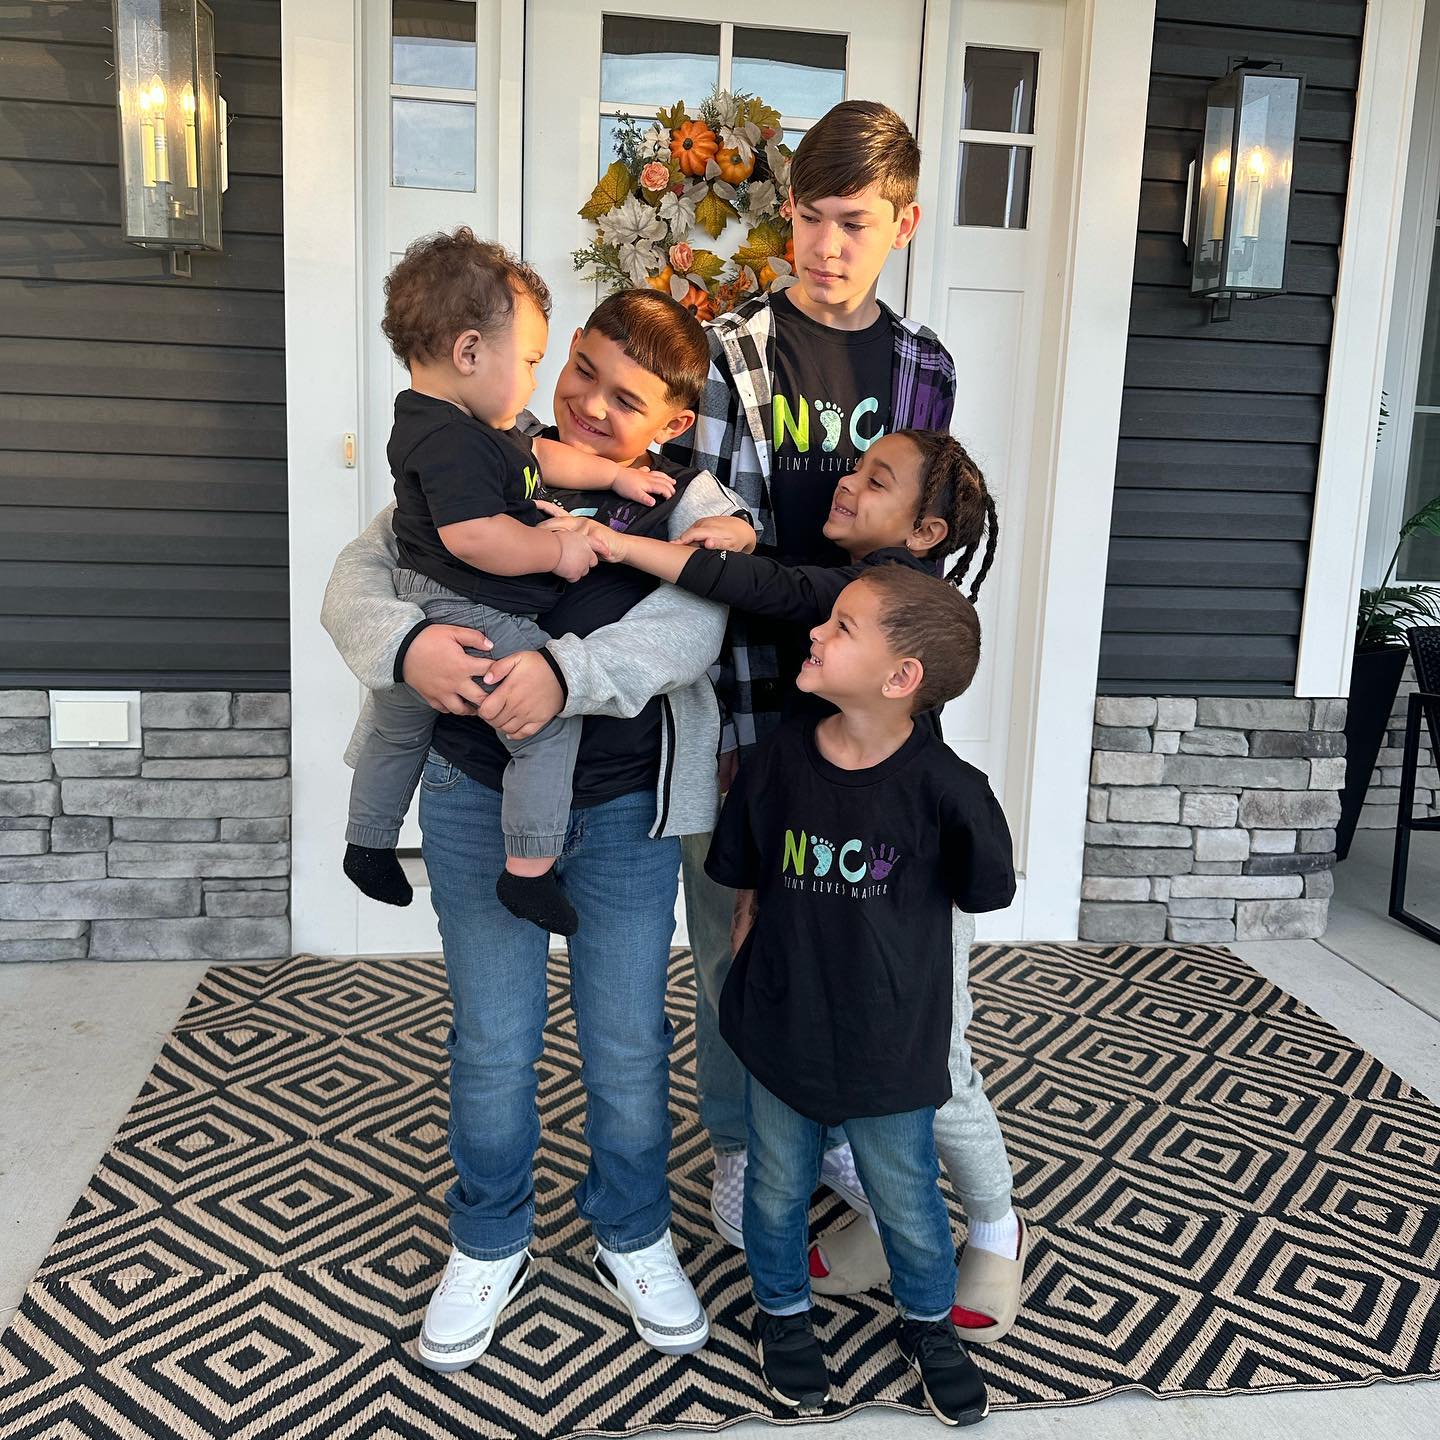 Kailyn is also a mom to sons: Isaac, Lincoln, Lux, Creed, and Rio